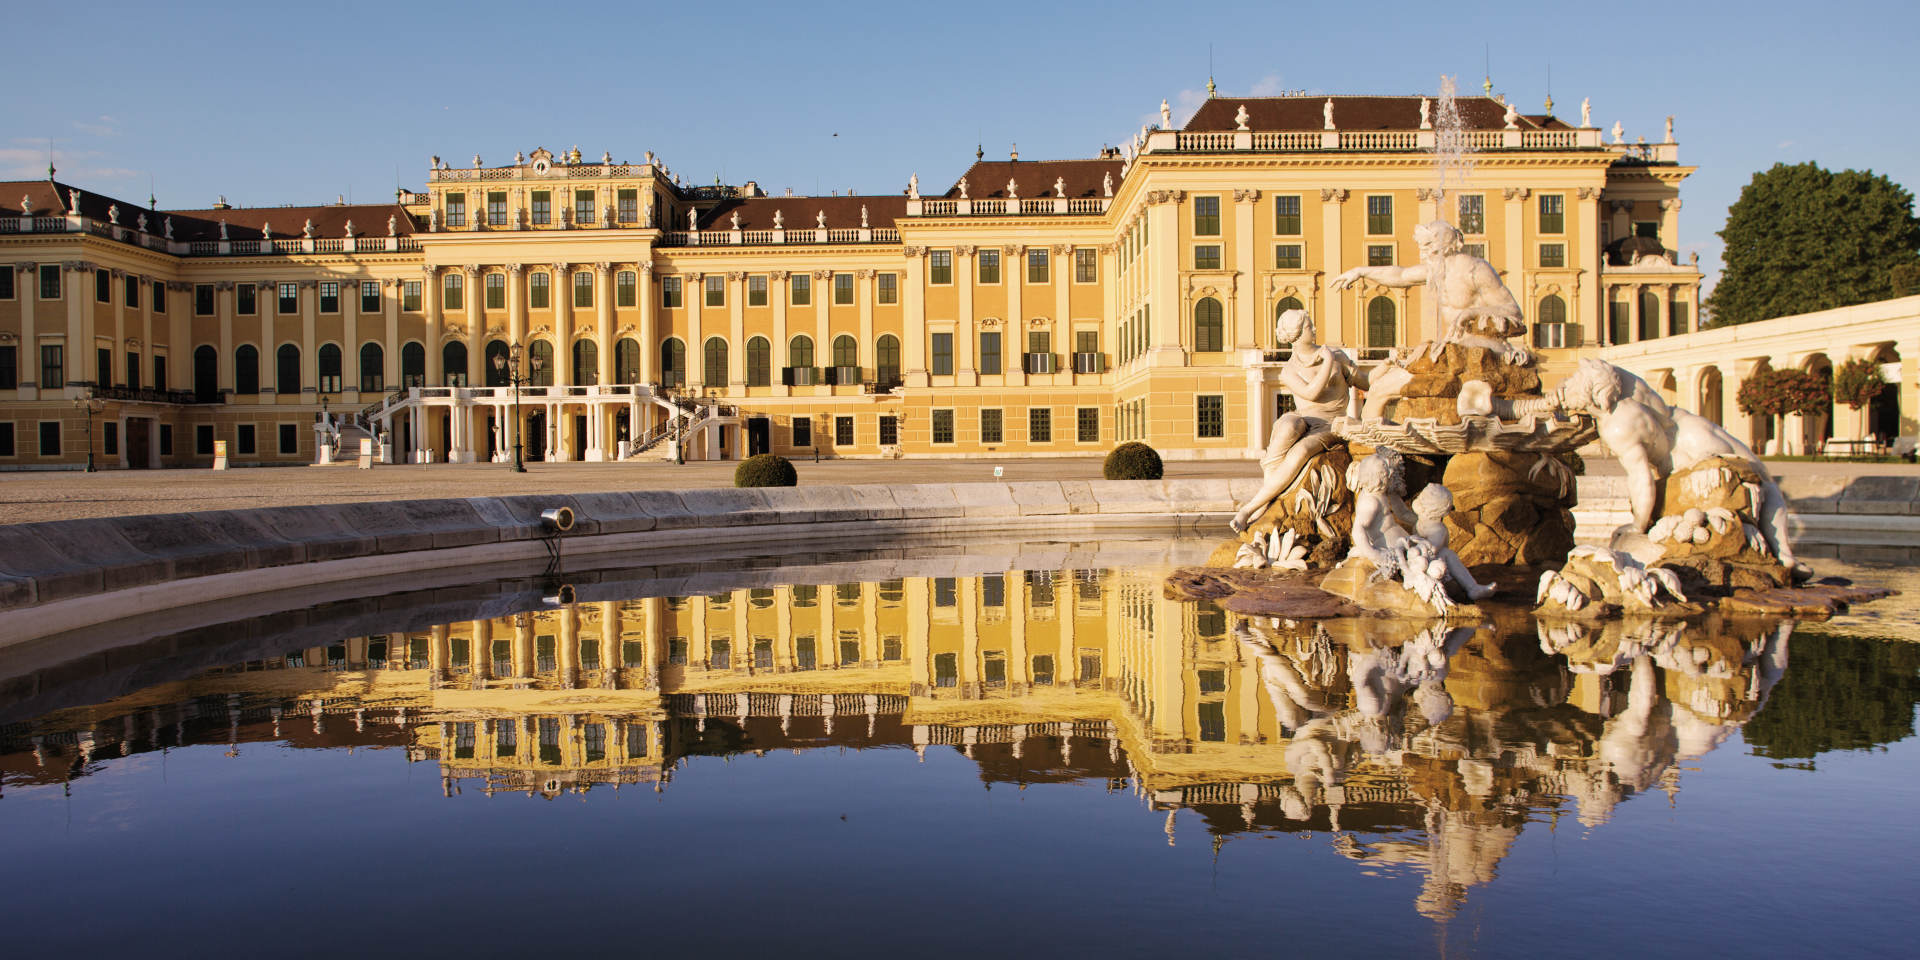 Schönbrunn Palace The Imperial Summer Residence In Vienna